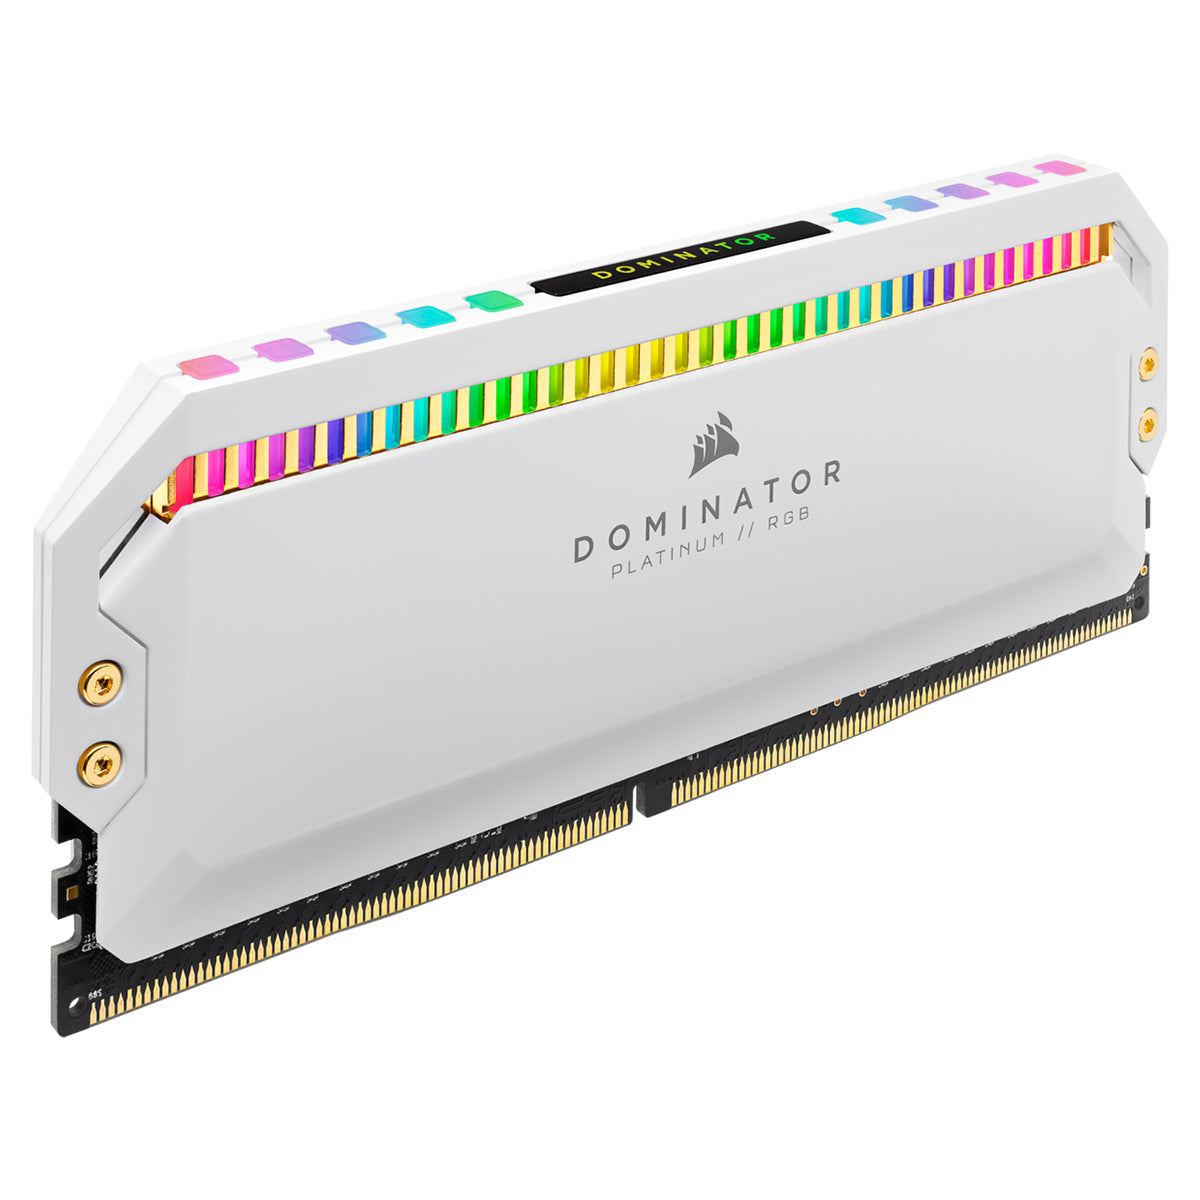 CORSAIR Dominator Platinum iCUE RGB 16GB (8GB x2) DDR4 C18 with 3600MHz Base Speed, Overclockable Speed for Desktop PC (Black, White) | CMT16GX4M2C3600C18 CMT16GX4M2C3600C18W